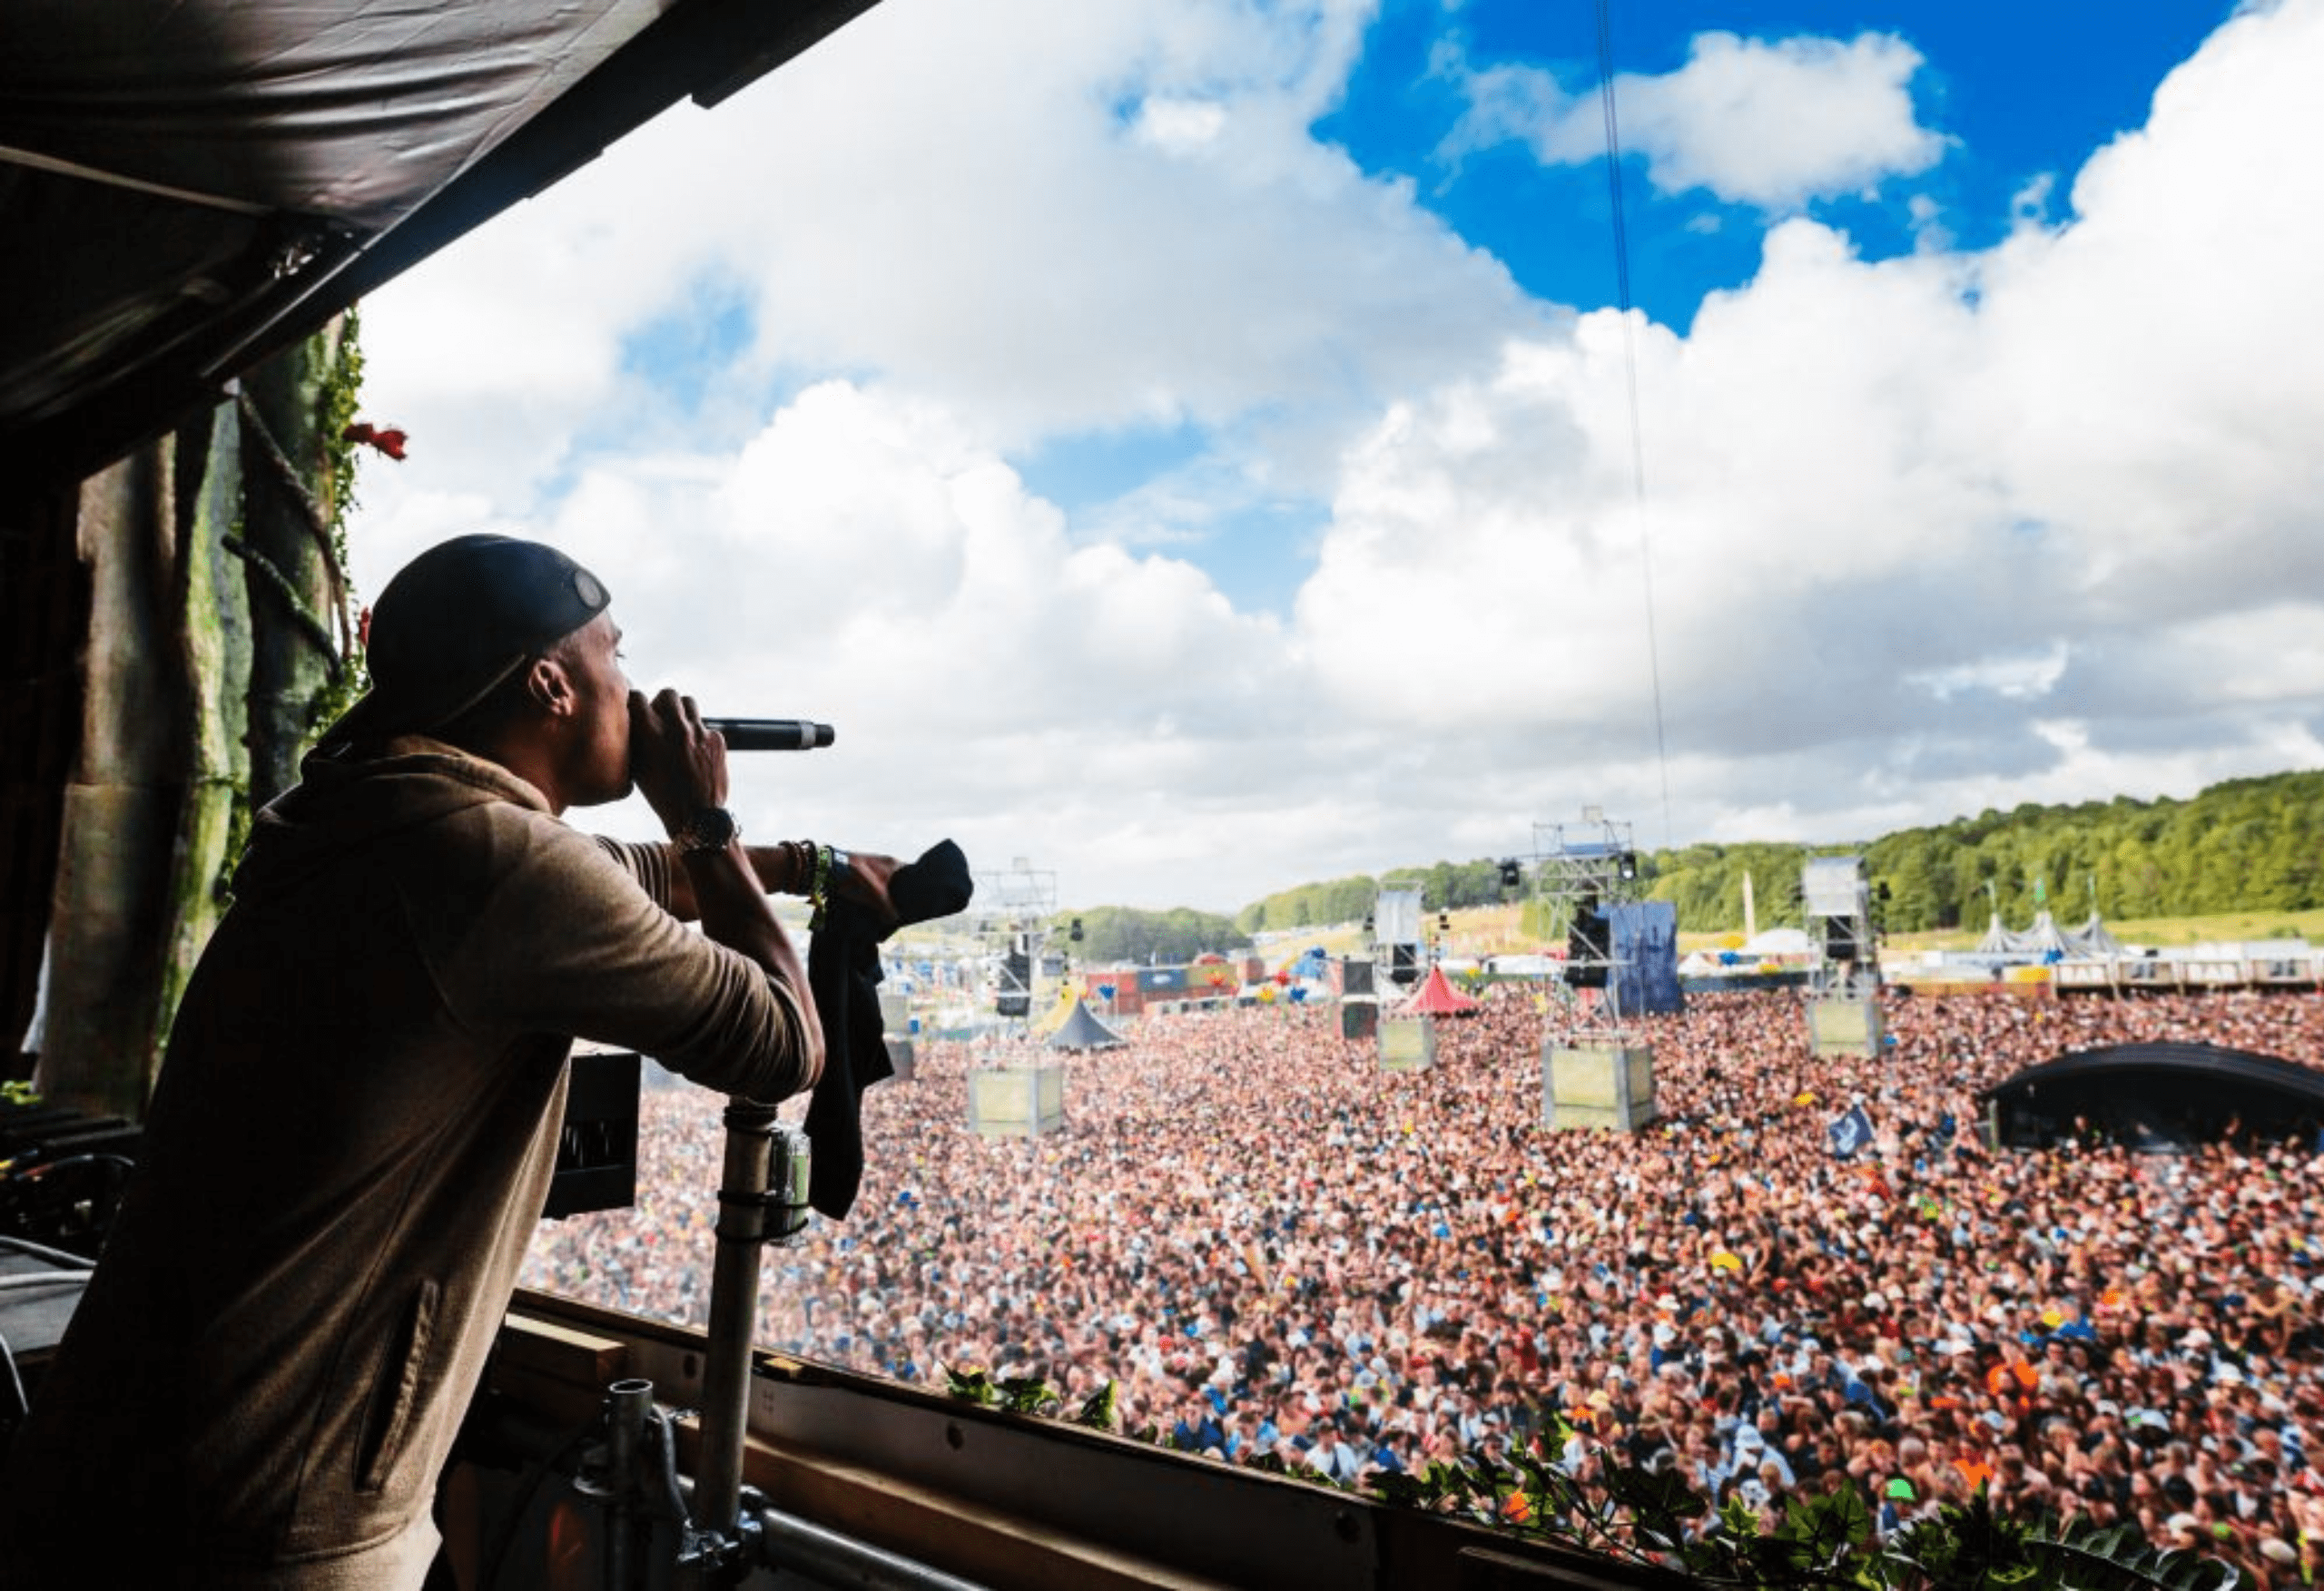 Man with microphone singing in front of large crowd at a festival